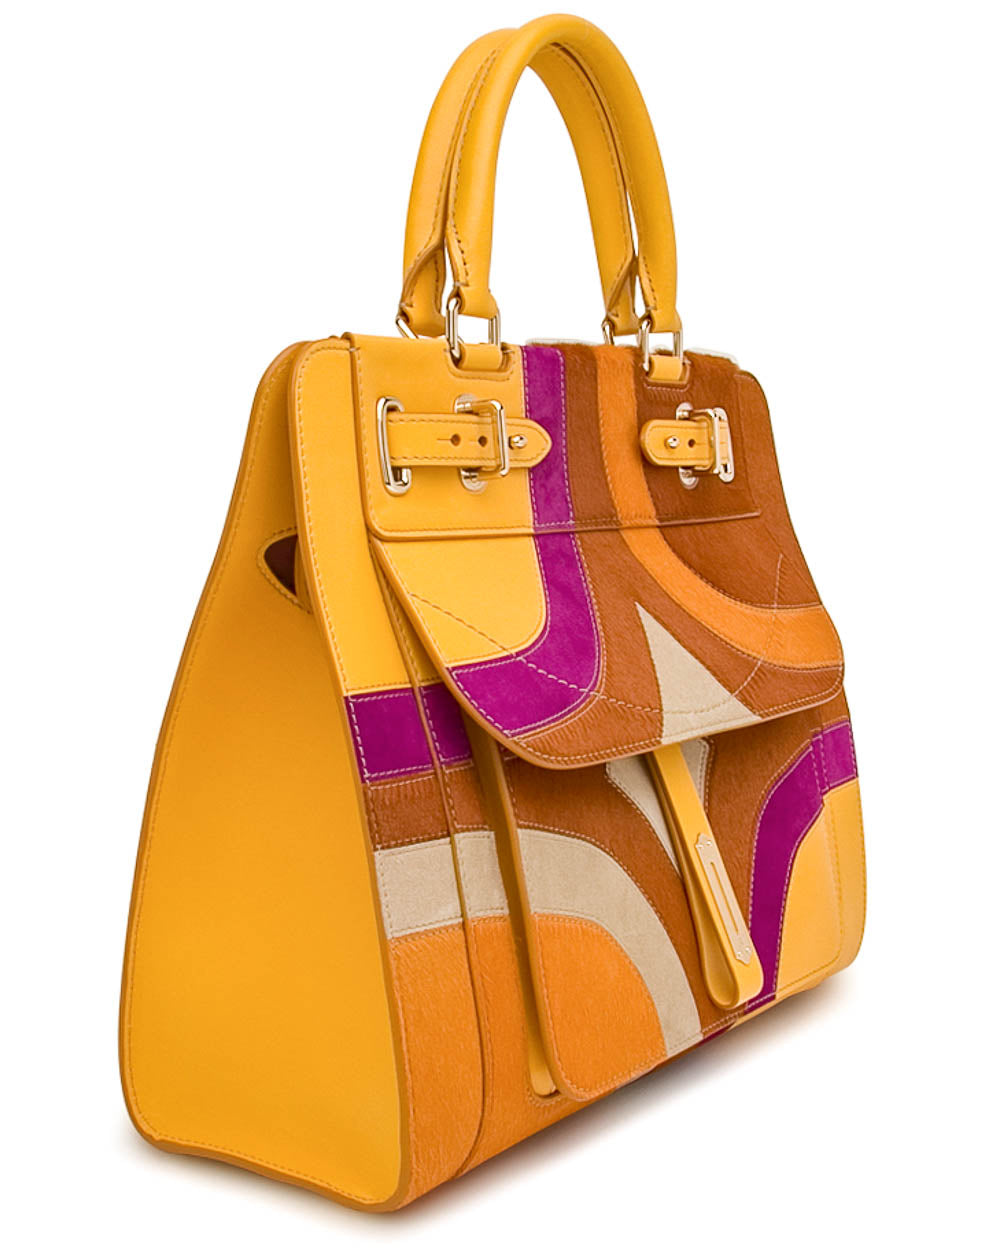 A Lady Bag in Yellow Patchwork